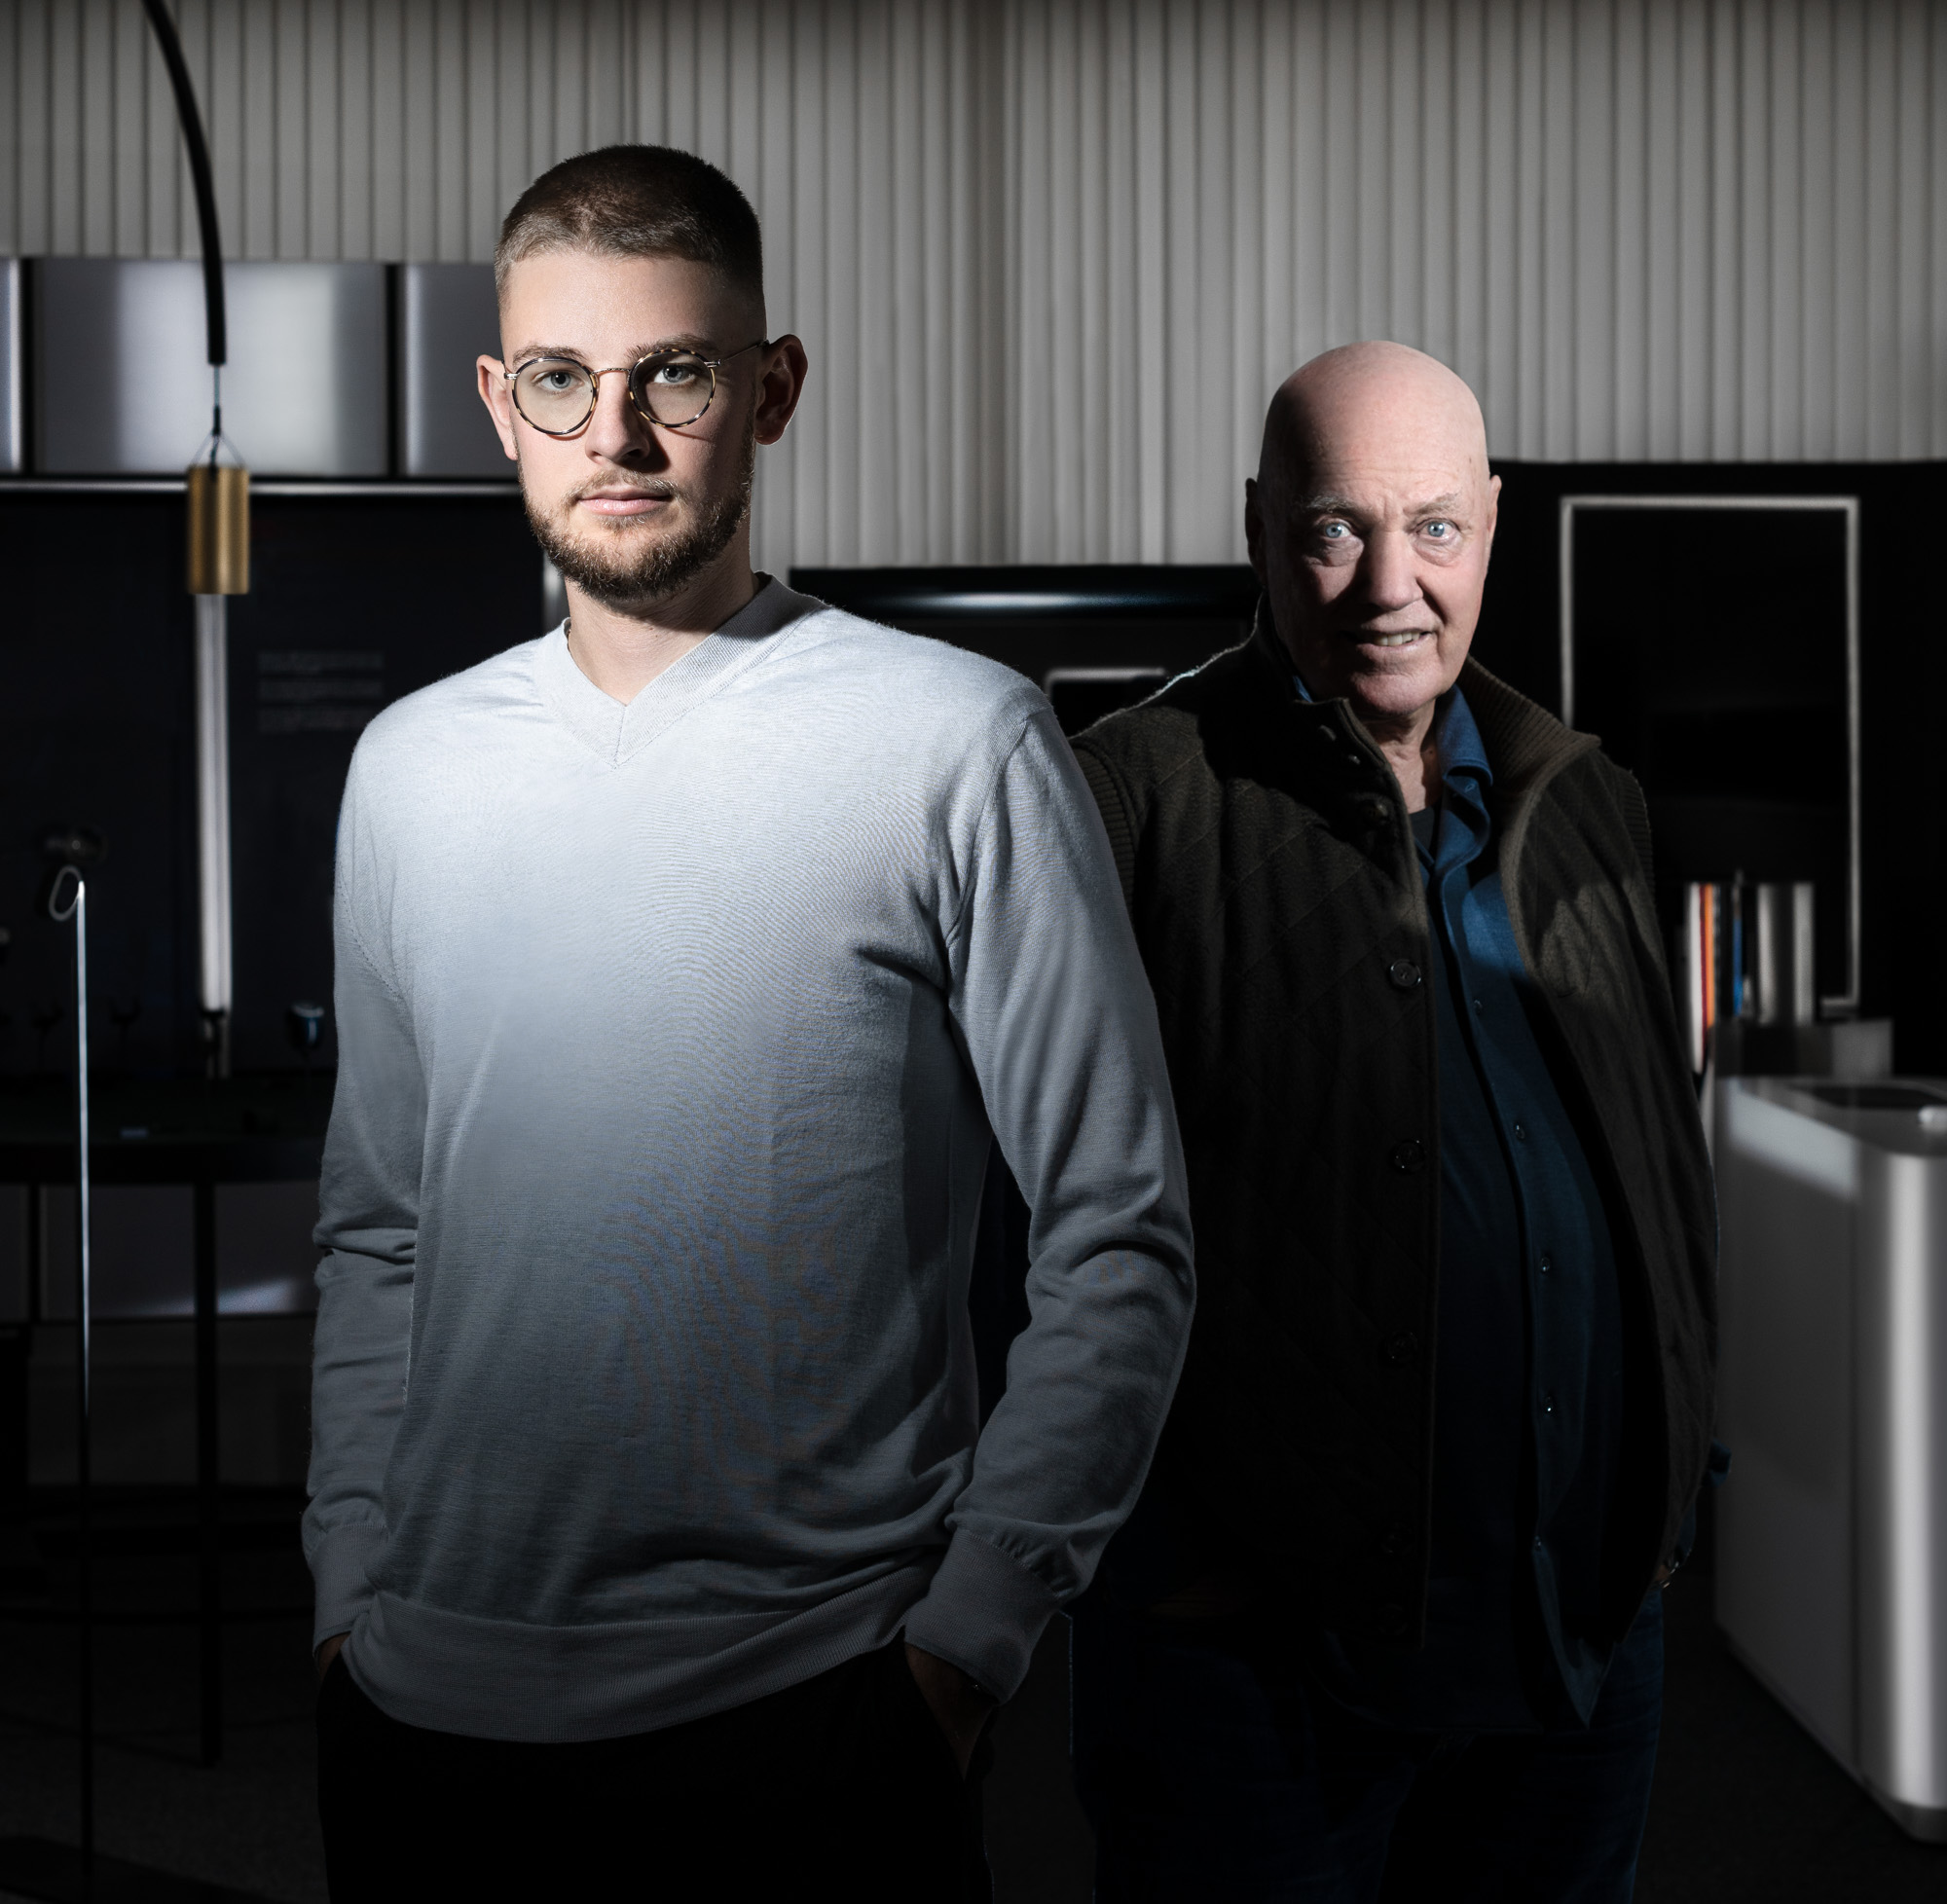 Jean-Claude and Pierre Biver introduce Biver Watches, a family